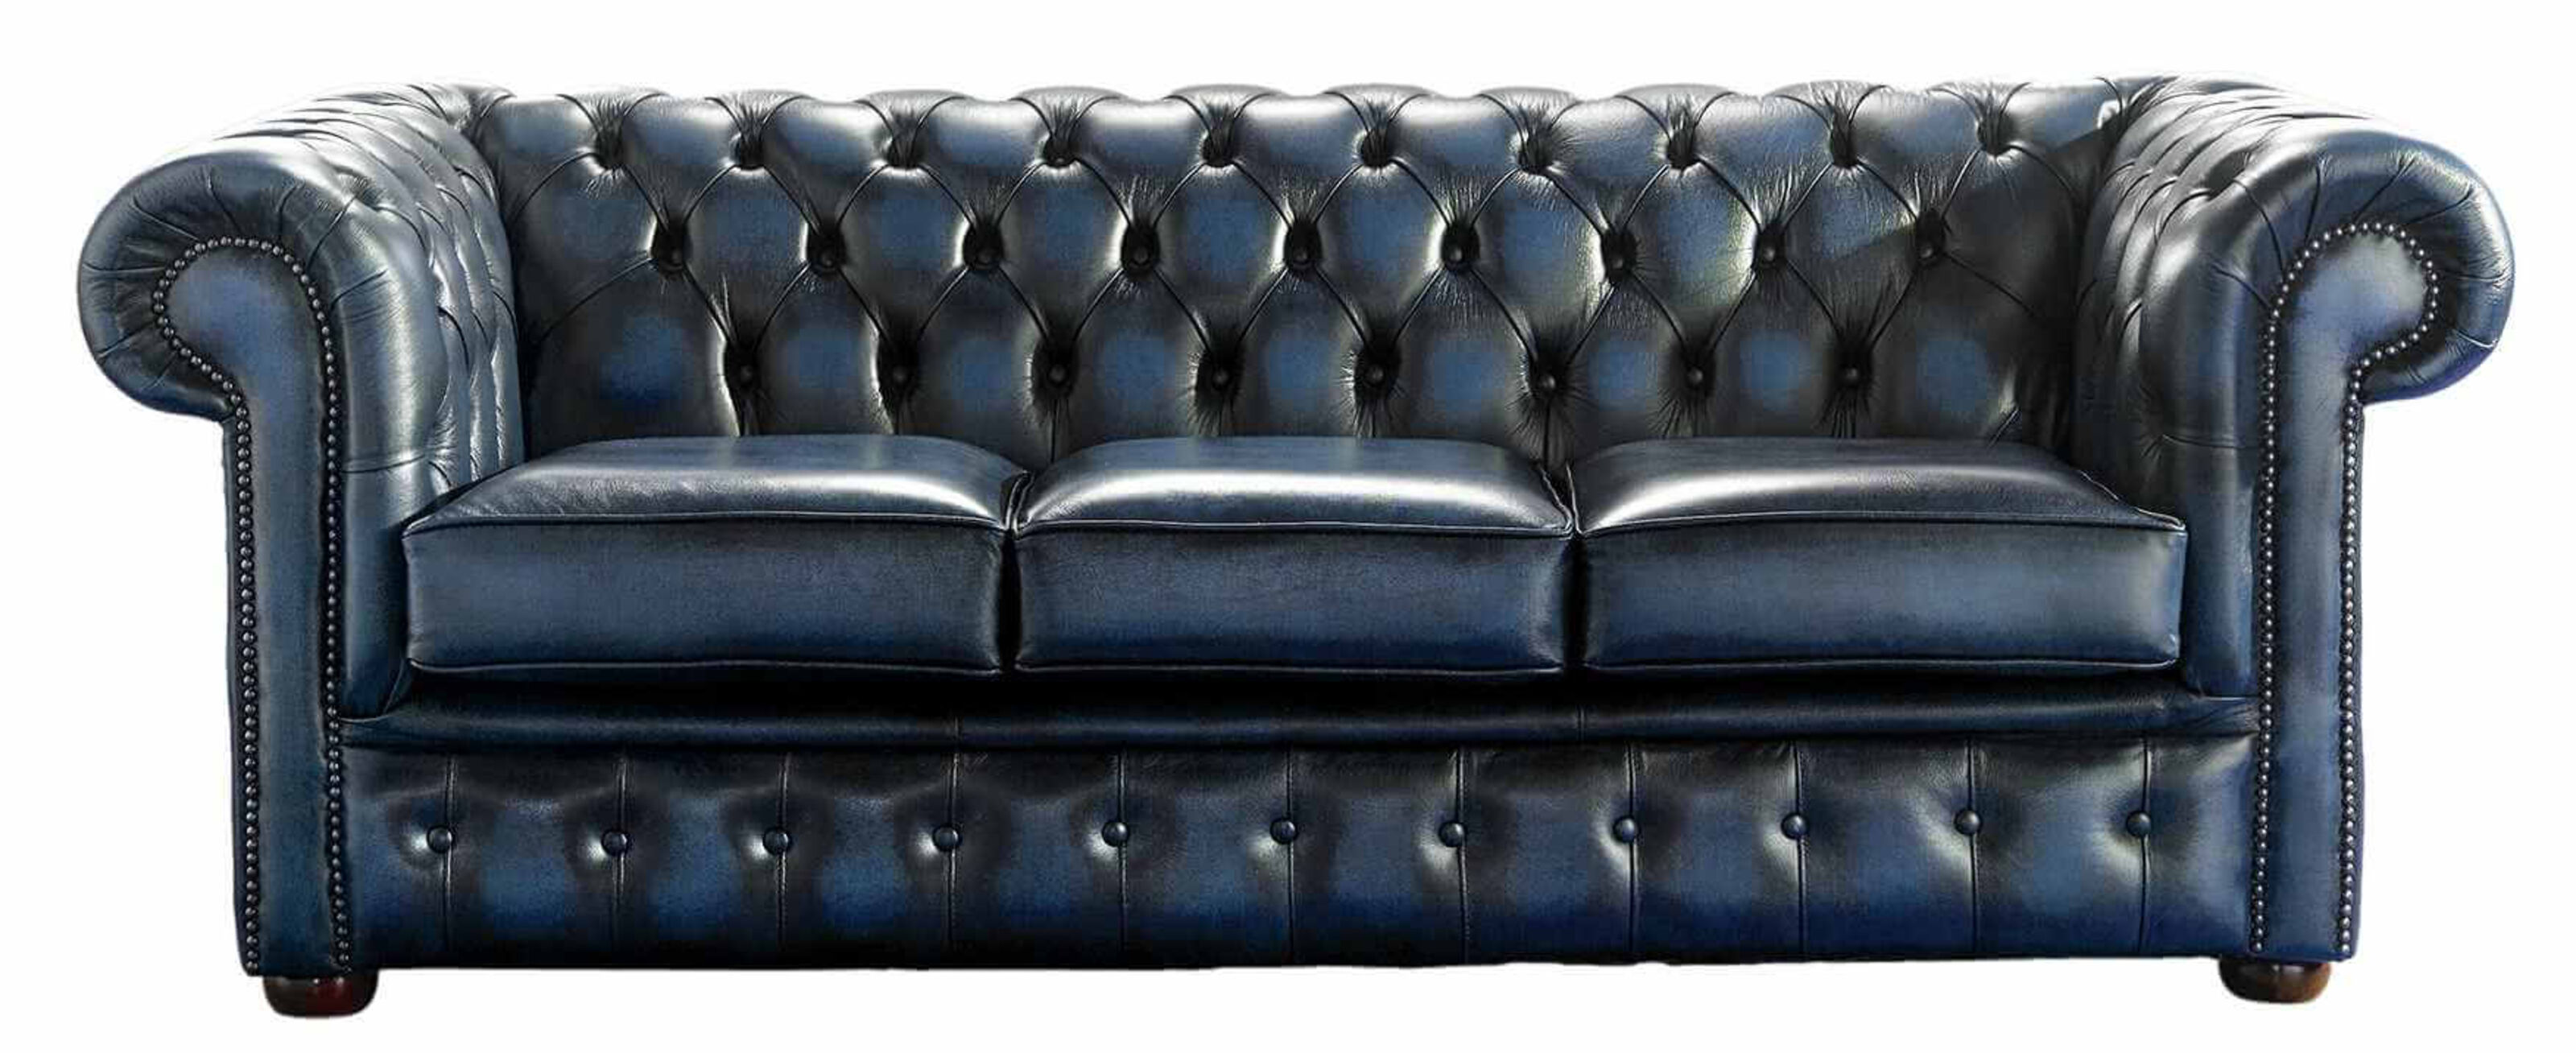 Score a Stylish Yet Affordable Chesterfield Sofa: Wholesale Tips Ahead  %Post Title